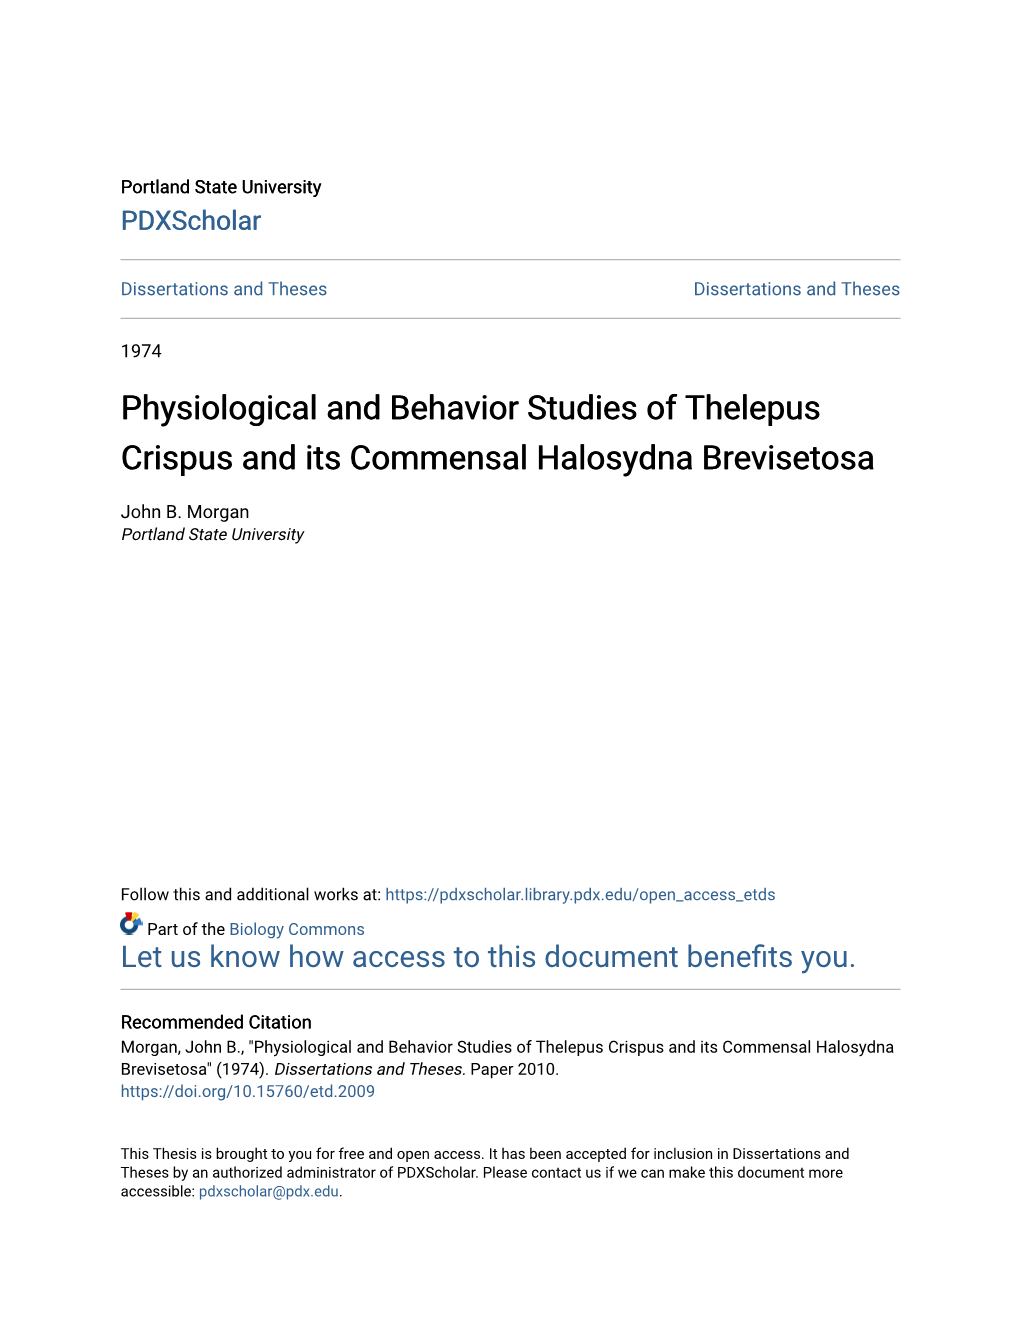 Physiological and Behavior Studies of Thelepus Crispus and Its Commensal Halosydna Brevisetosa